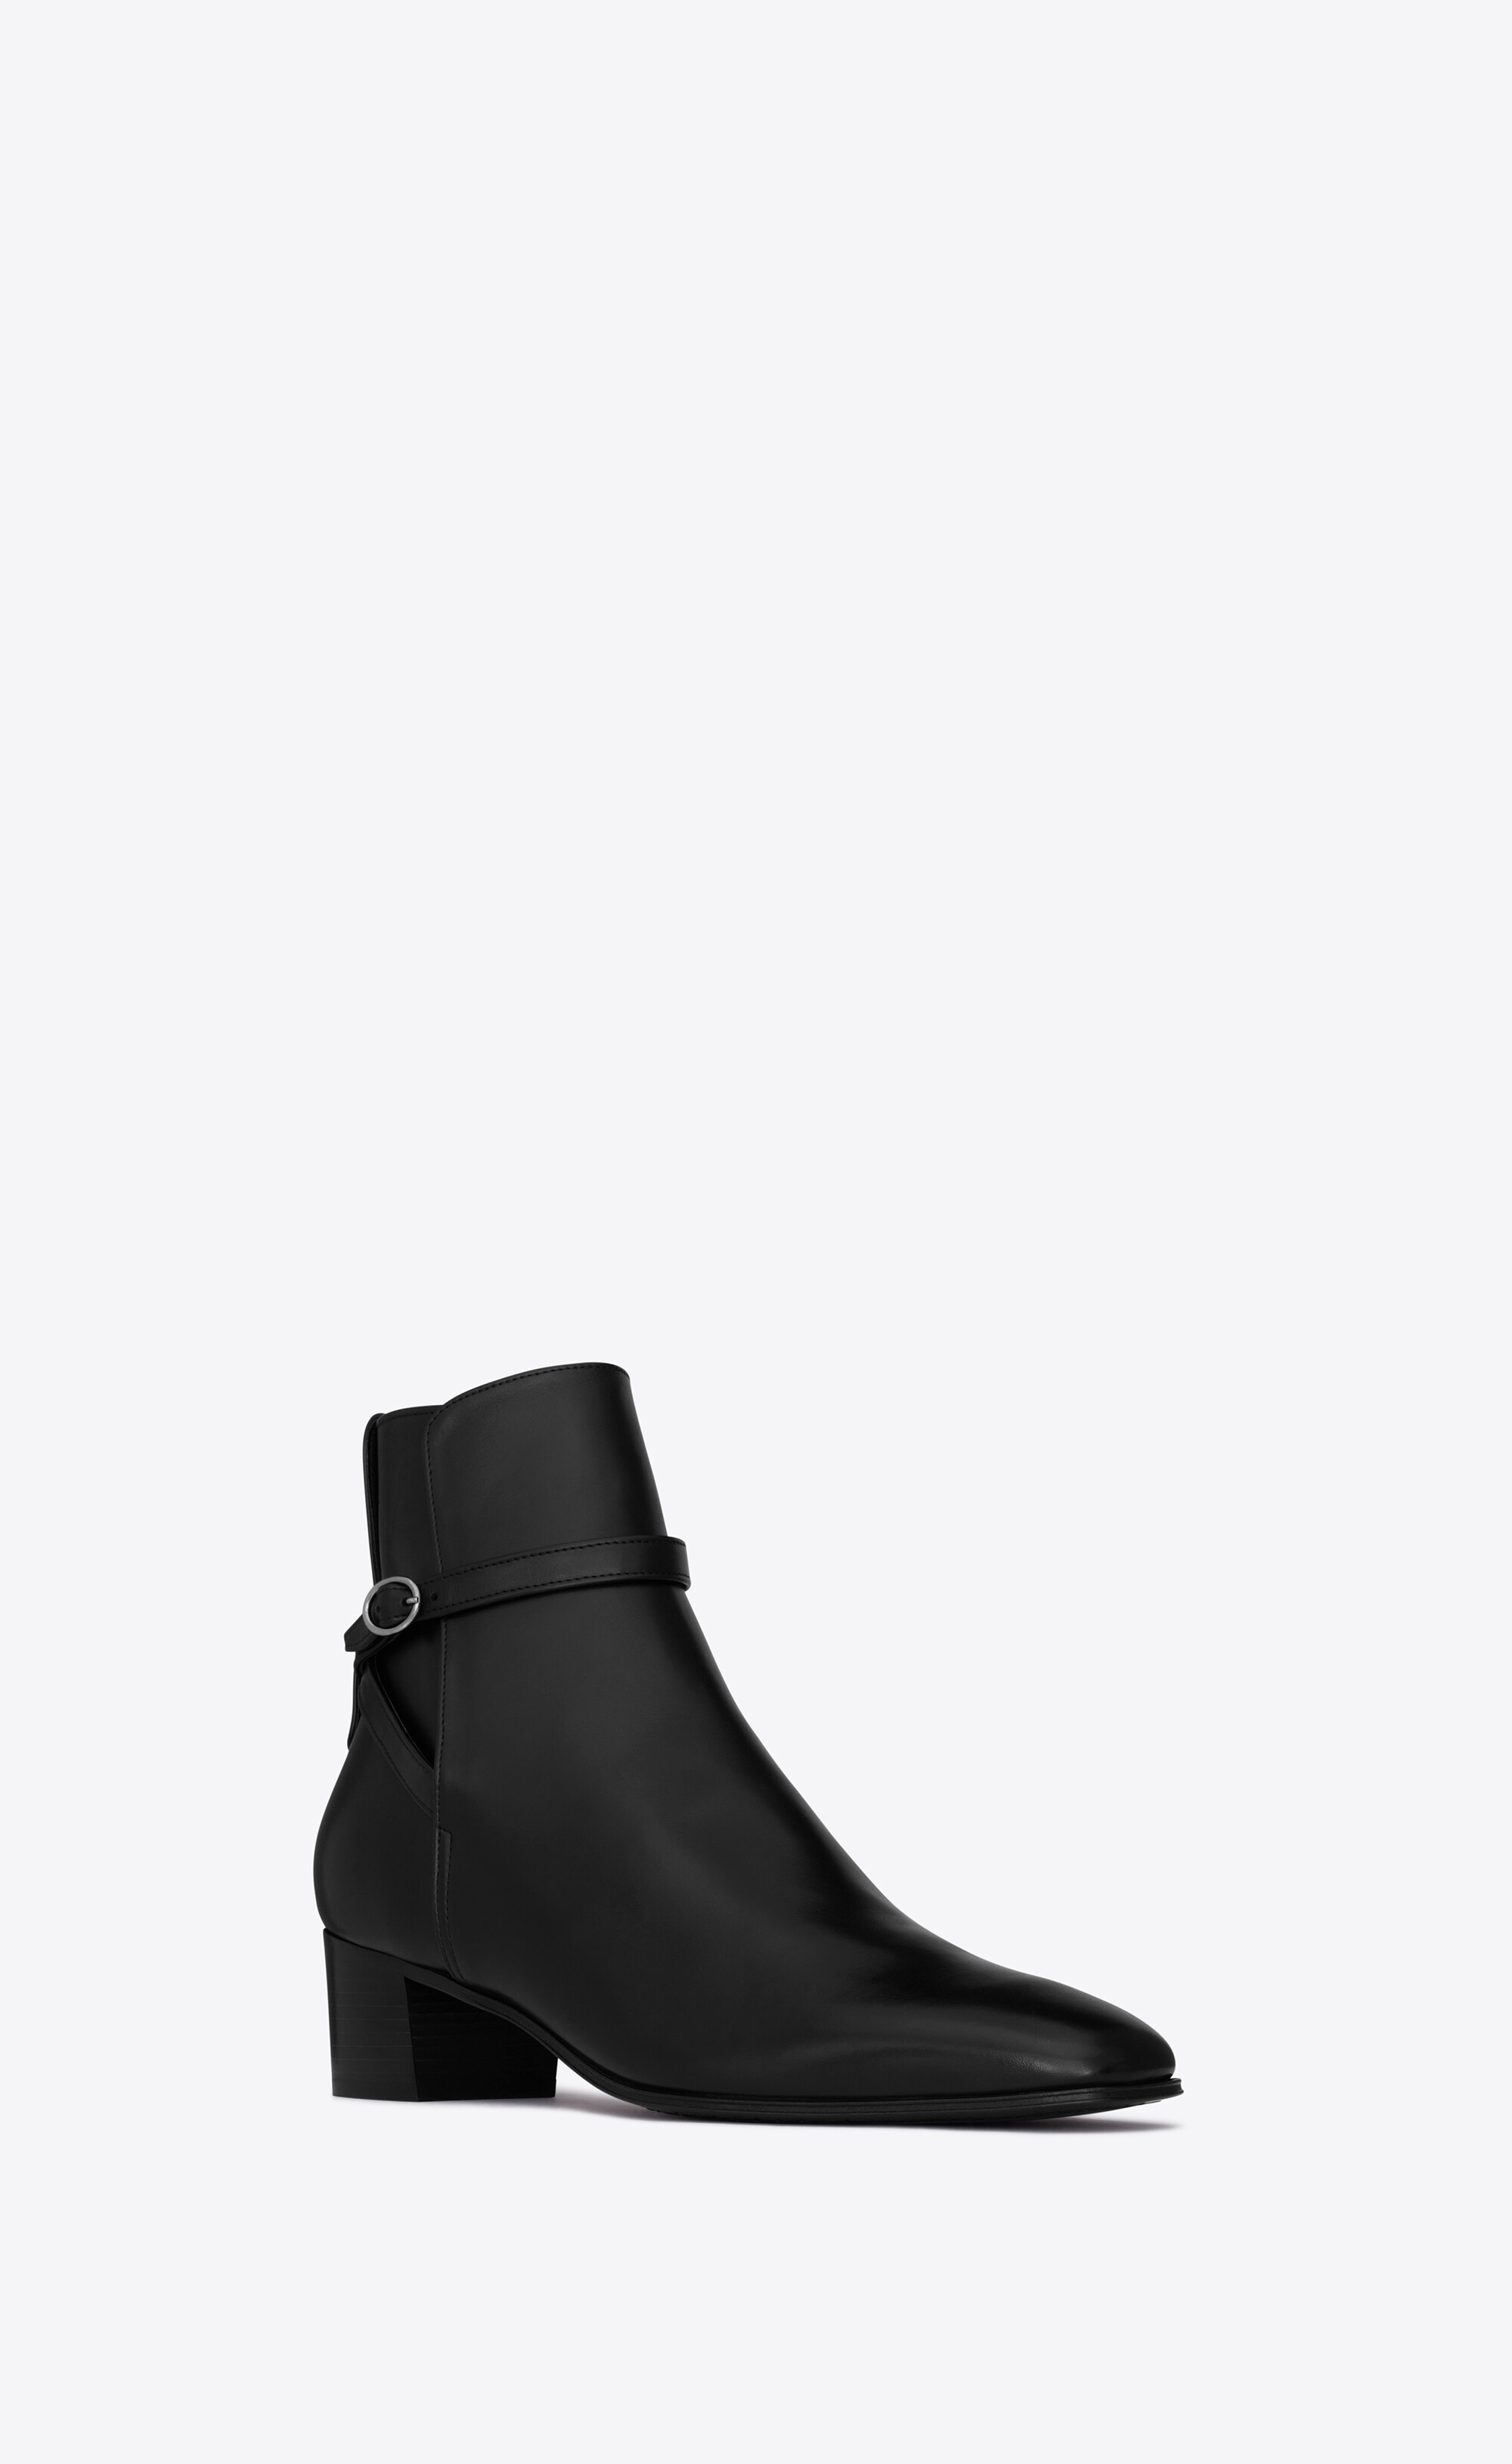 terry jodhpur boots in smooth leather - 3